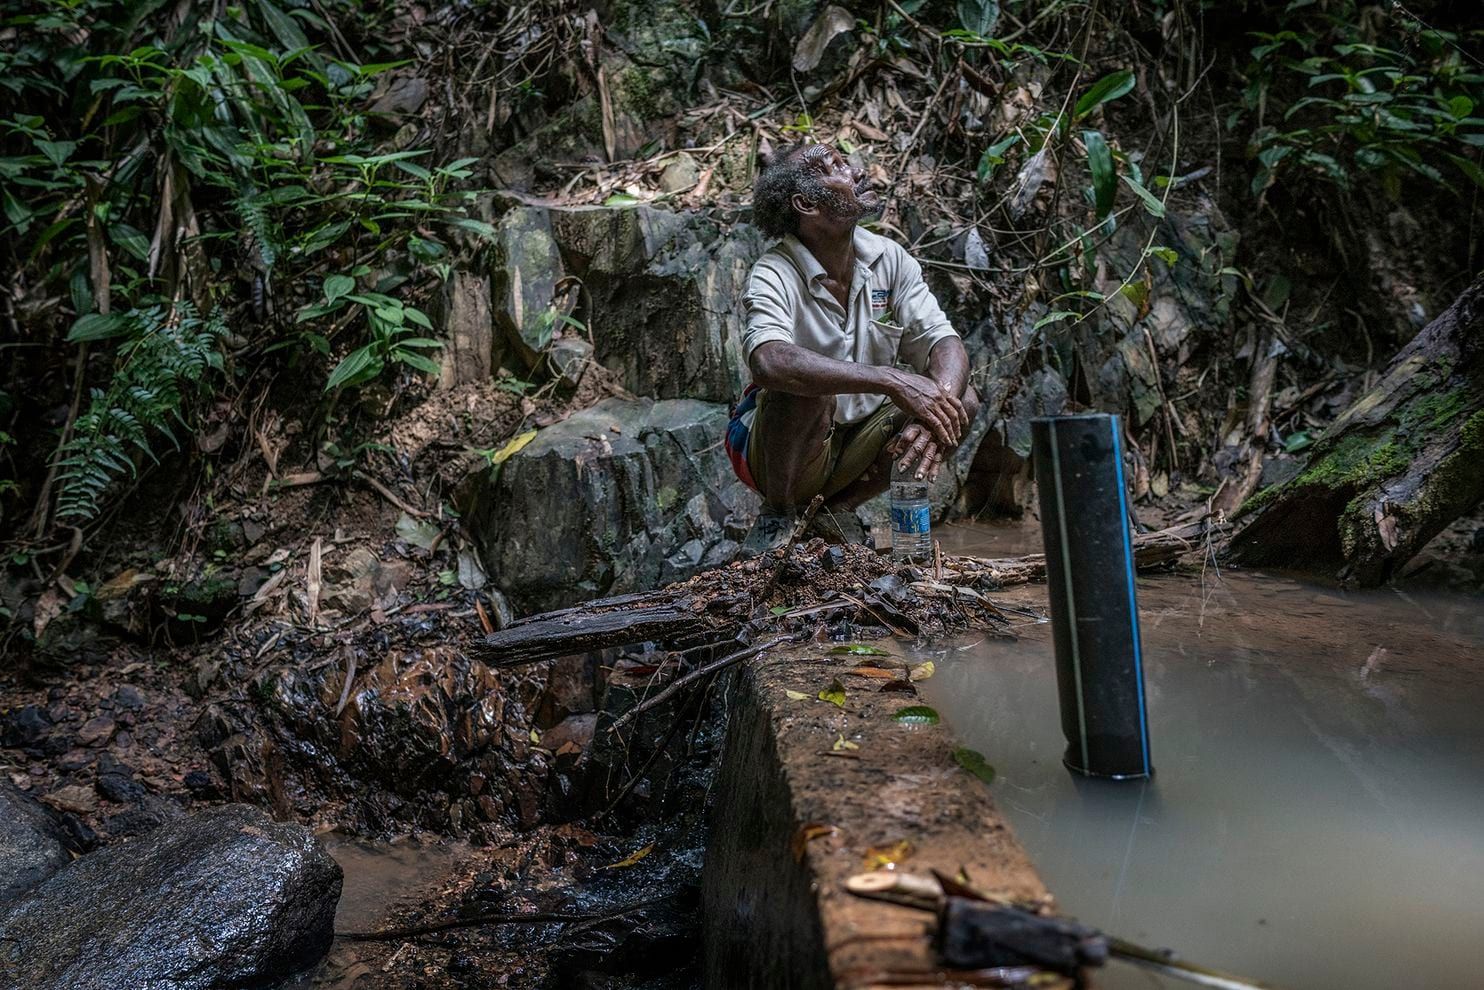 Johan Tahun takes a break atop the small concrete dam across the Tonduk River, built by the Malaysian government. Image by James Whitlow Delano. Malaysia, 2019.